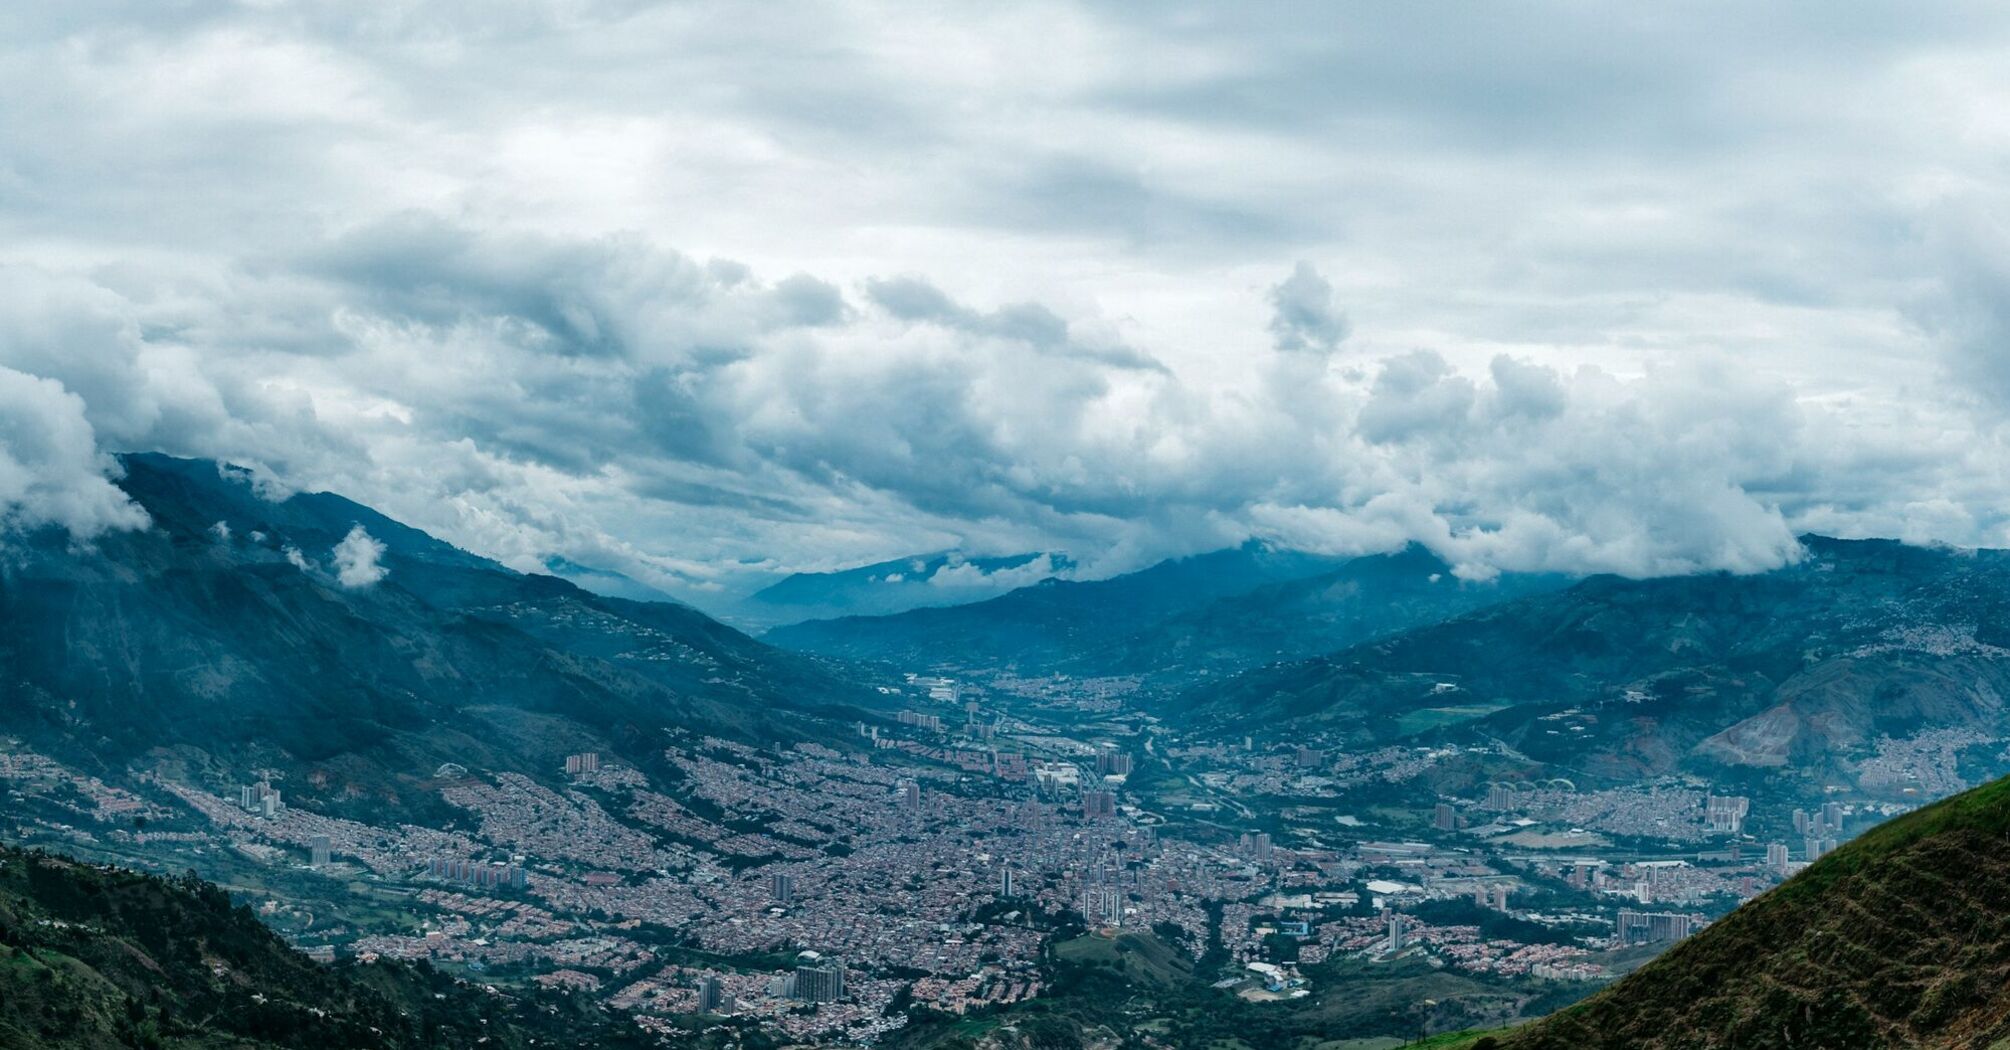 Aerial view of a city nestled in a valley with surrounding mountains and clouds overhead 